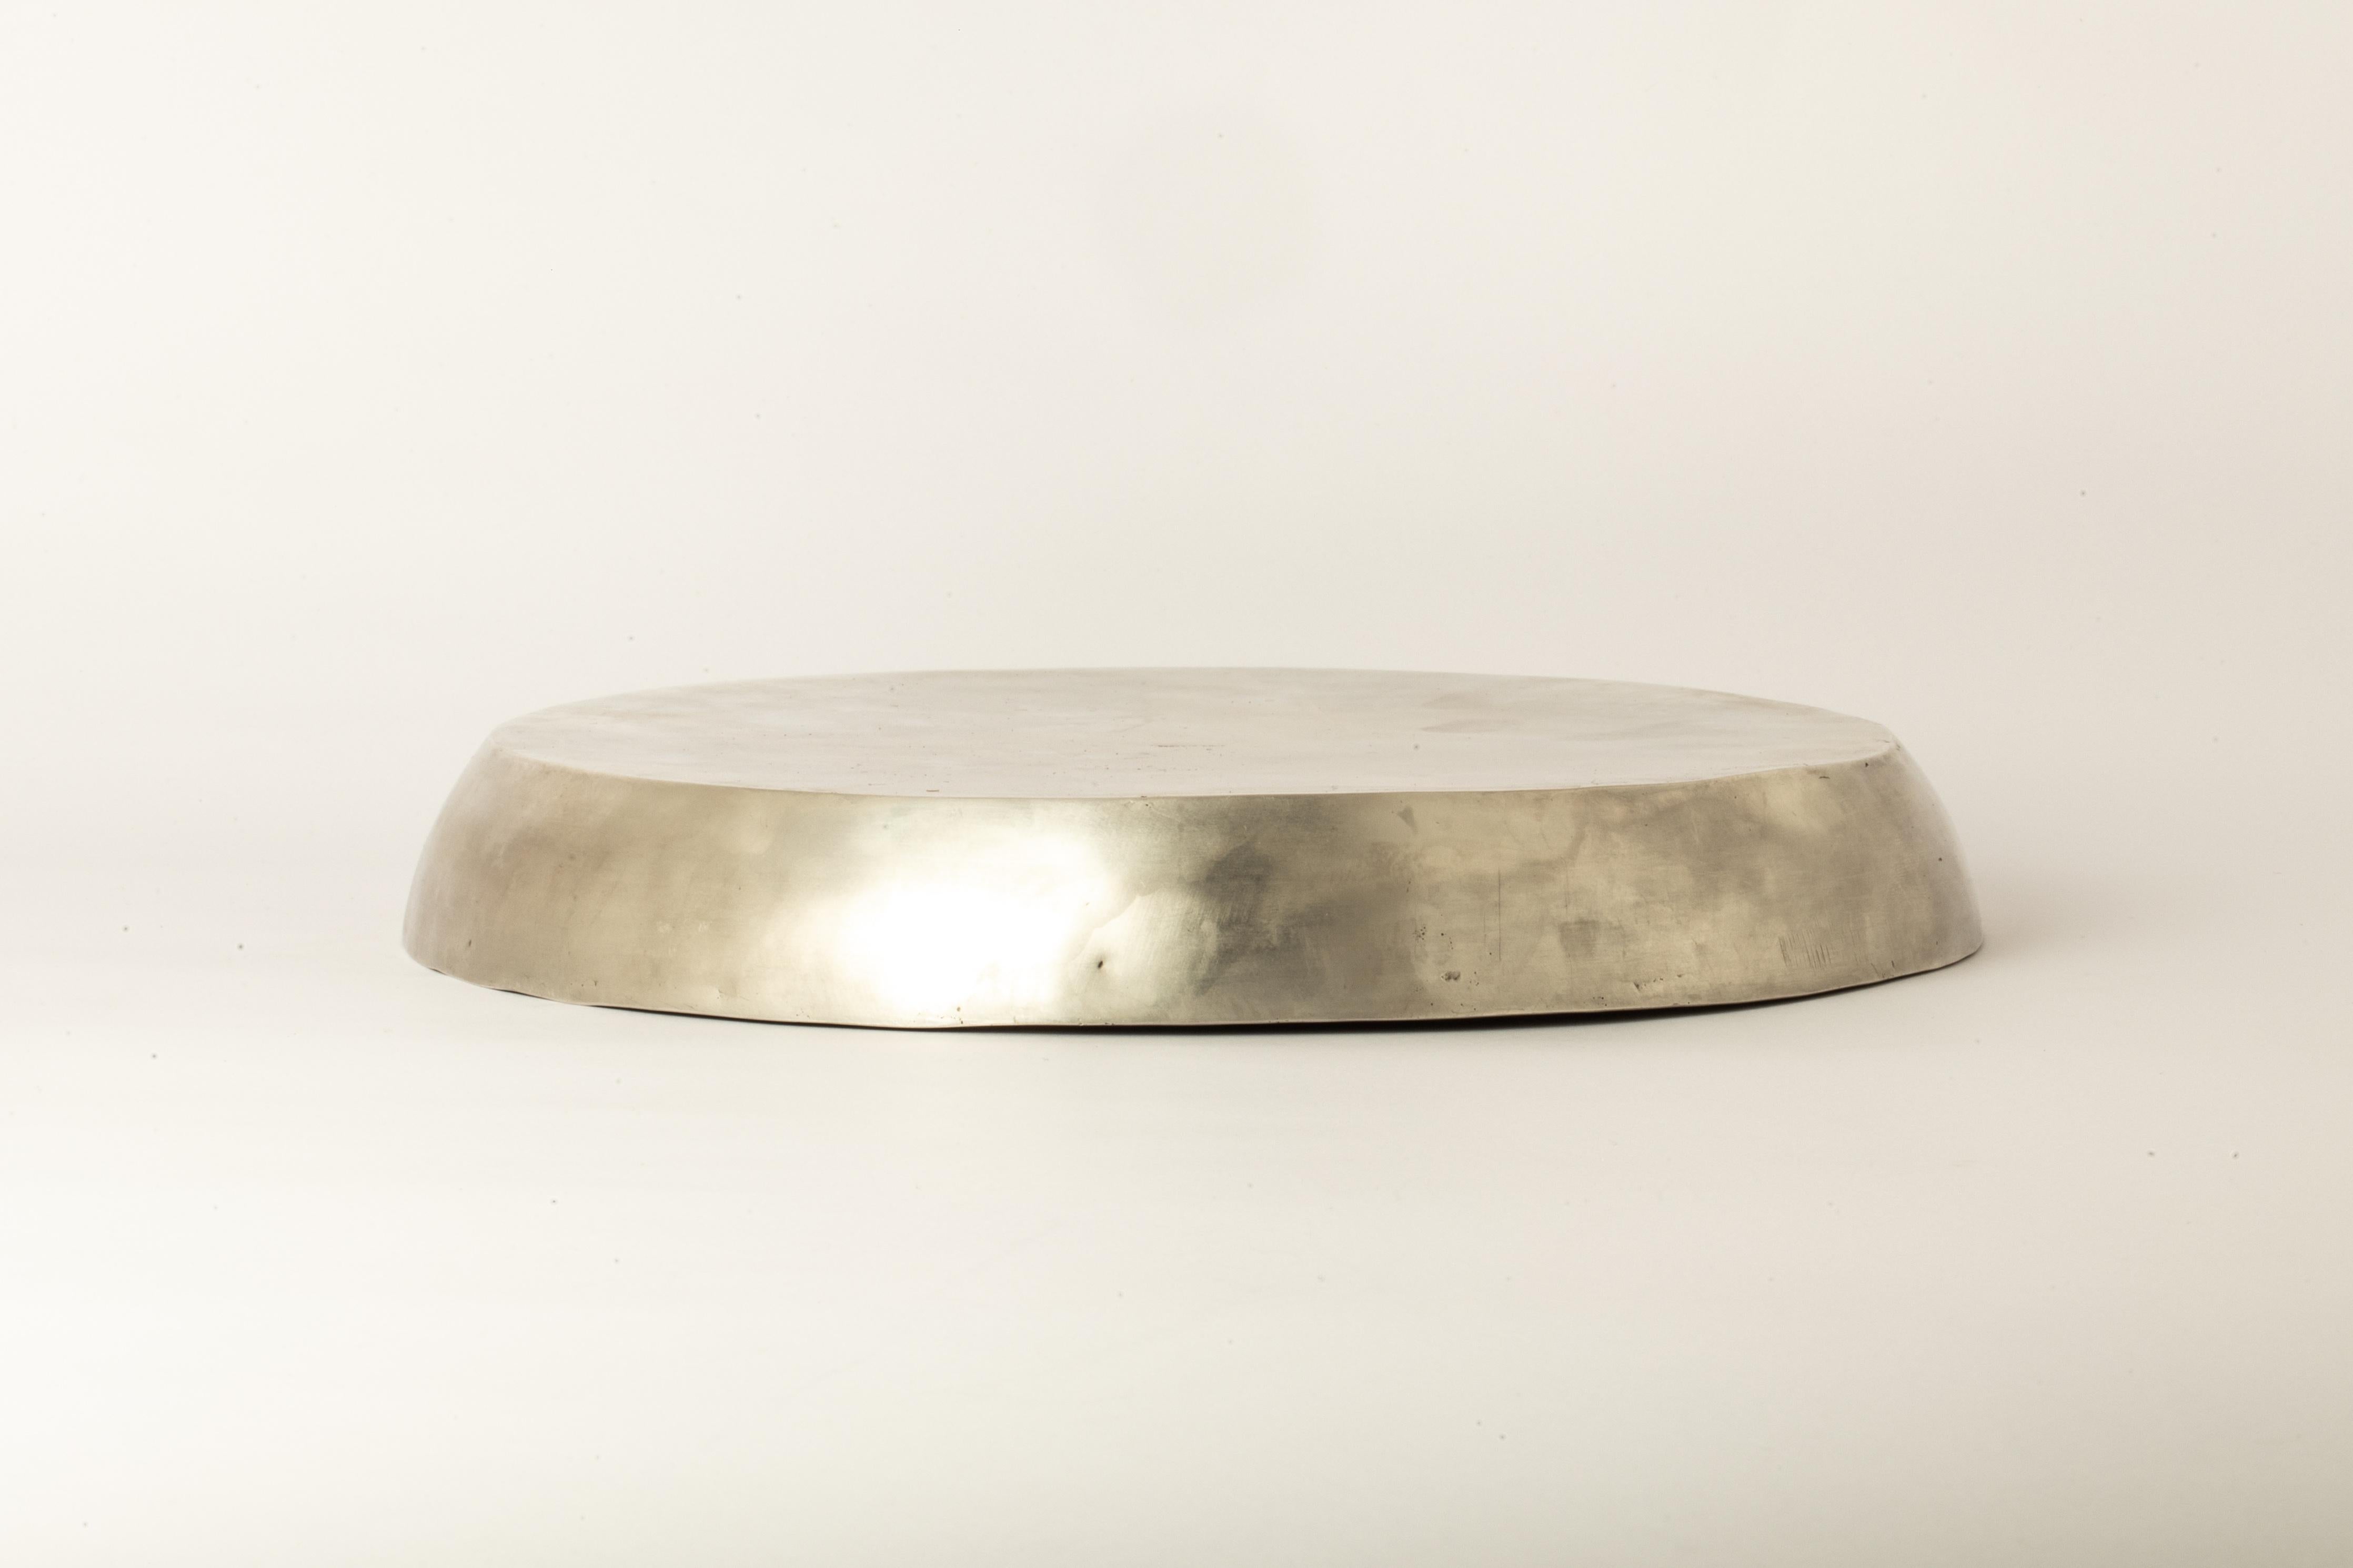 This plate is hand-made in brass. Brass substrate is electroplated with silver and then dipped into acid to create the subtly destroyed surface. Crafted with meticulous care, it is a masterpiece of metalwork. Every inch is a testament to artisanal